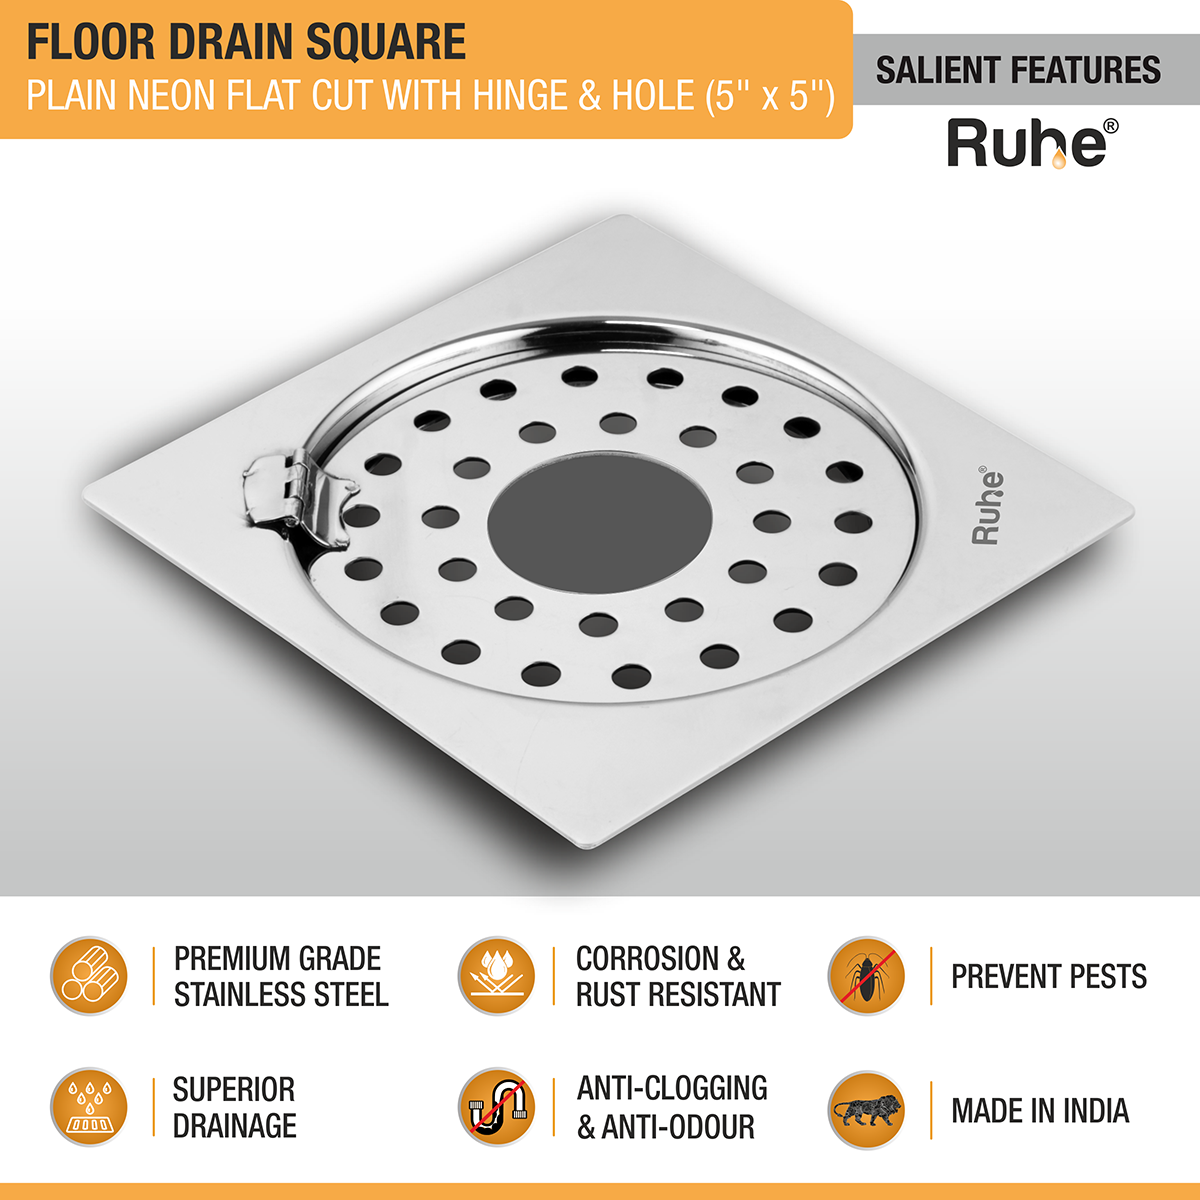 Plain Neon Square Flat Cut Floor Drain (5 x 5 inches) with Hinged ...